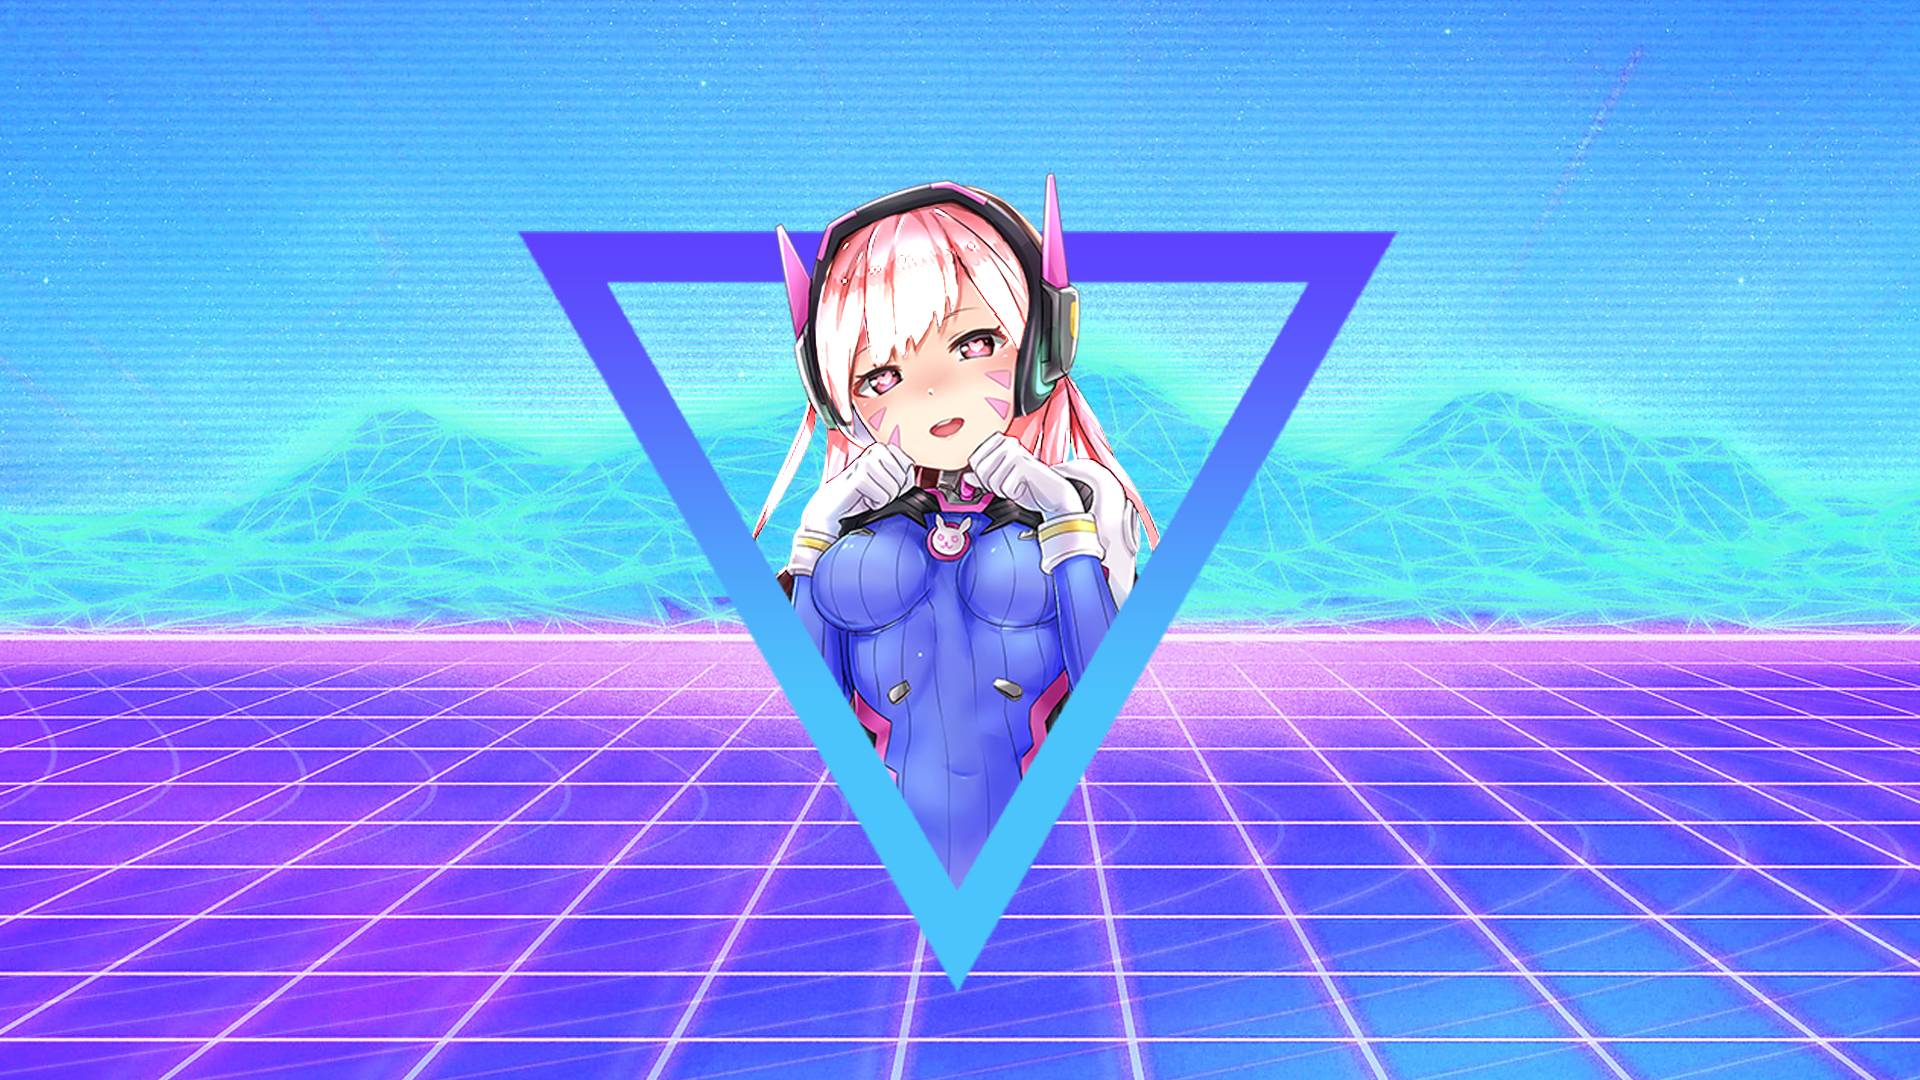 Featured image of post Anime Vaporwave Wallpaper 1920X1080 Vaporwave aesthetic hd wallpaper posted in mixed wallpapers category and wallpaper original resolution is 1920x1080 px